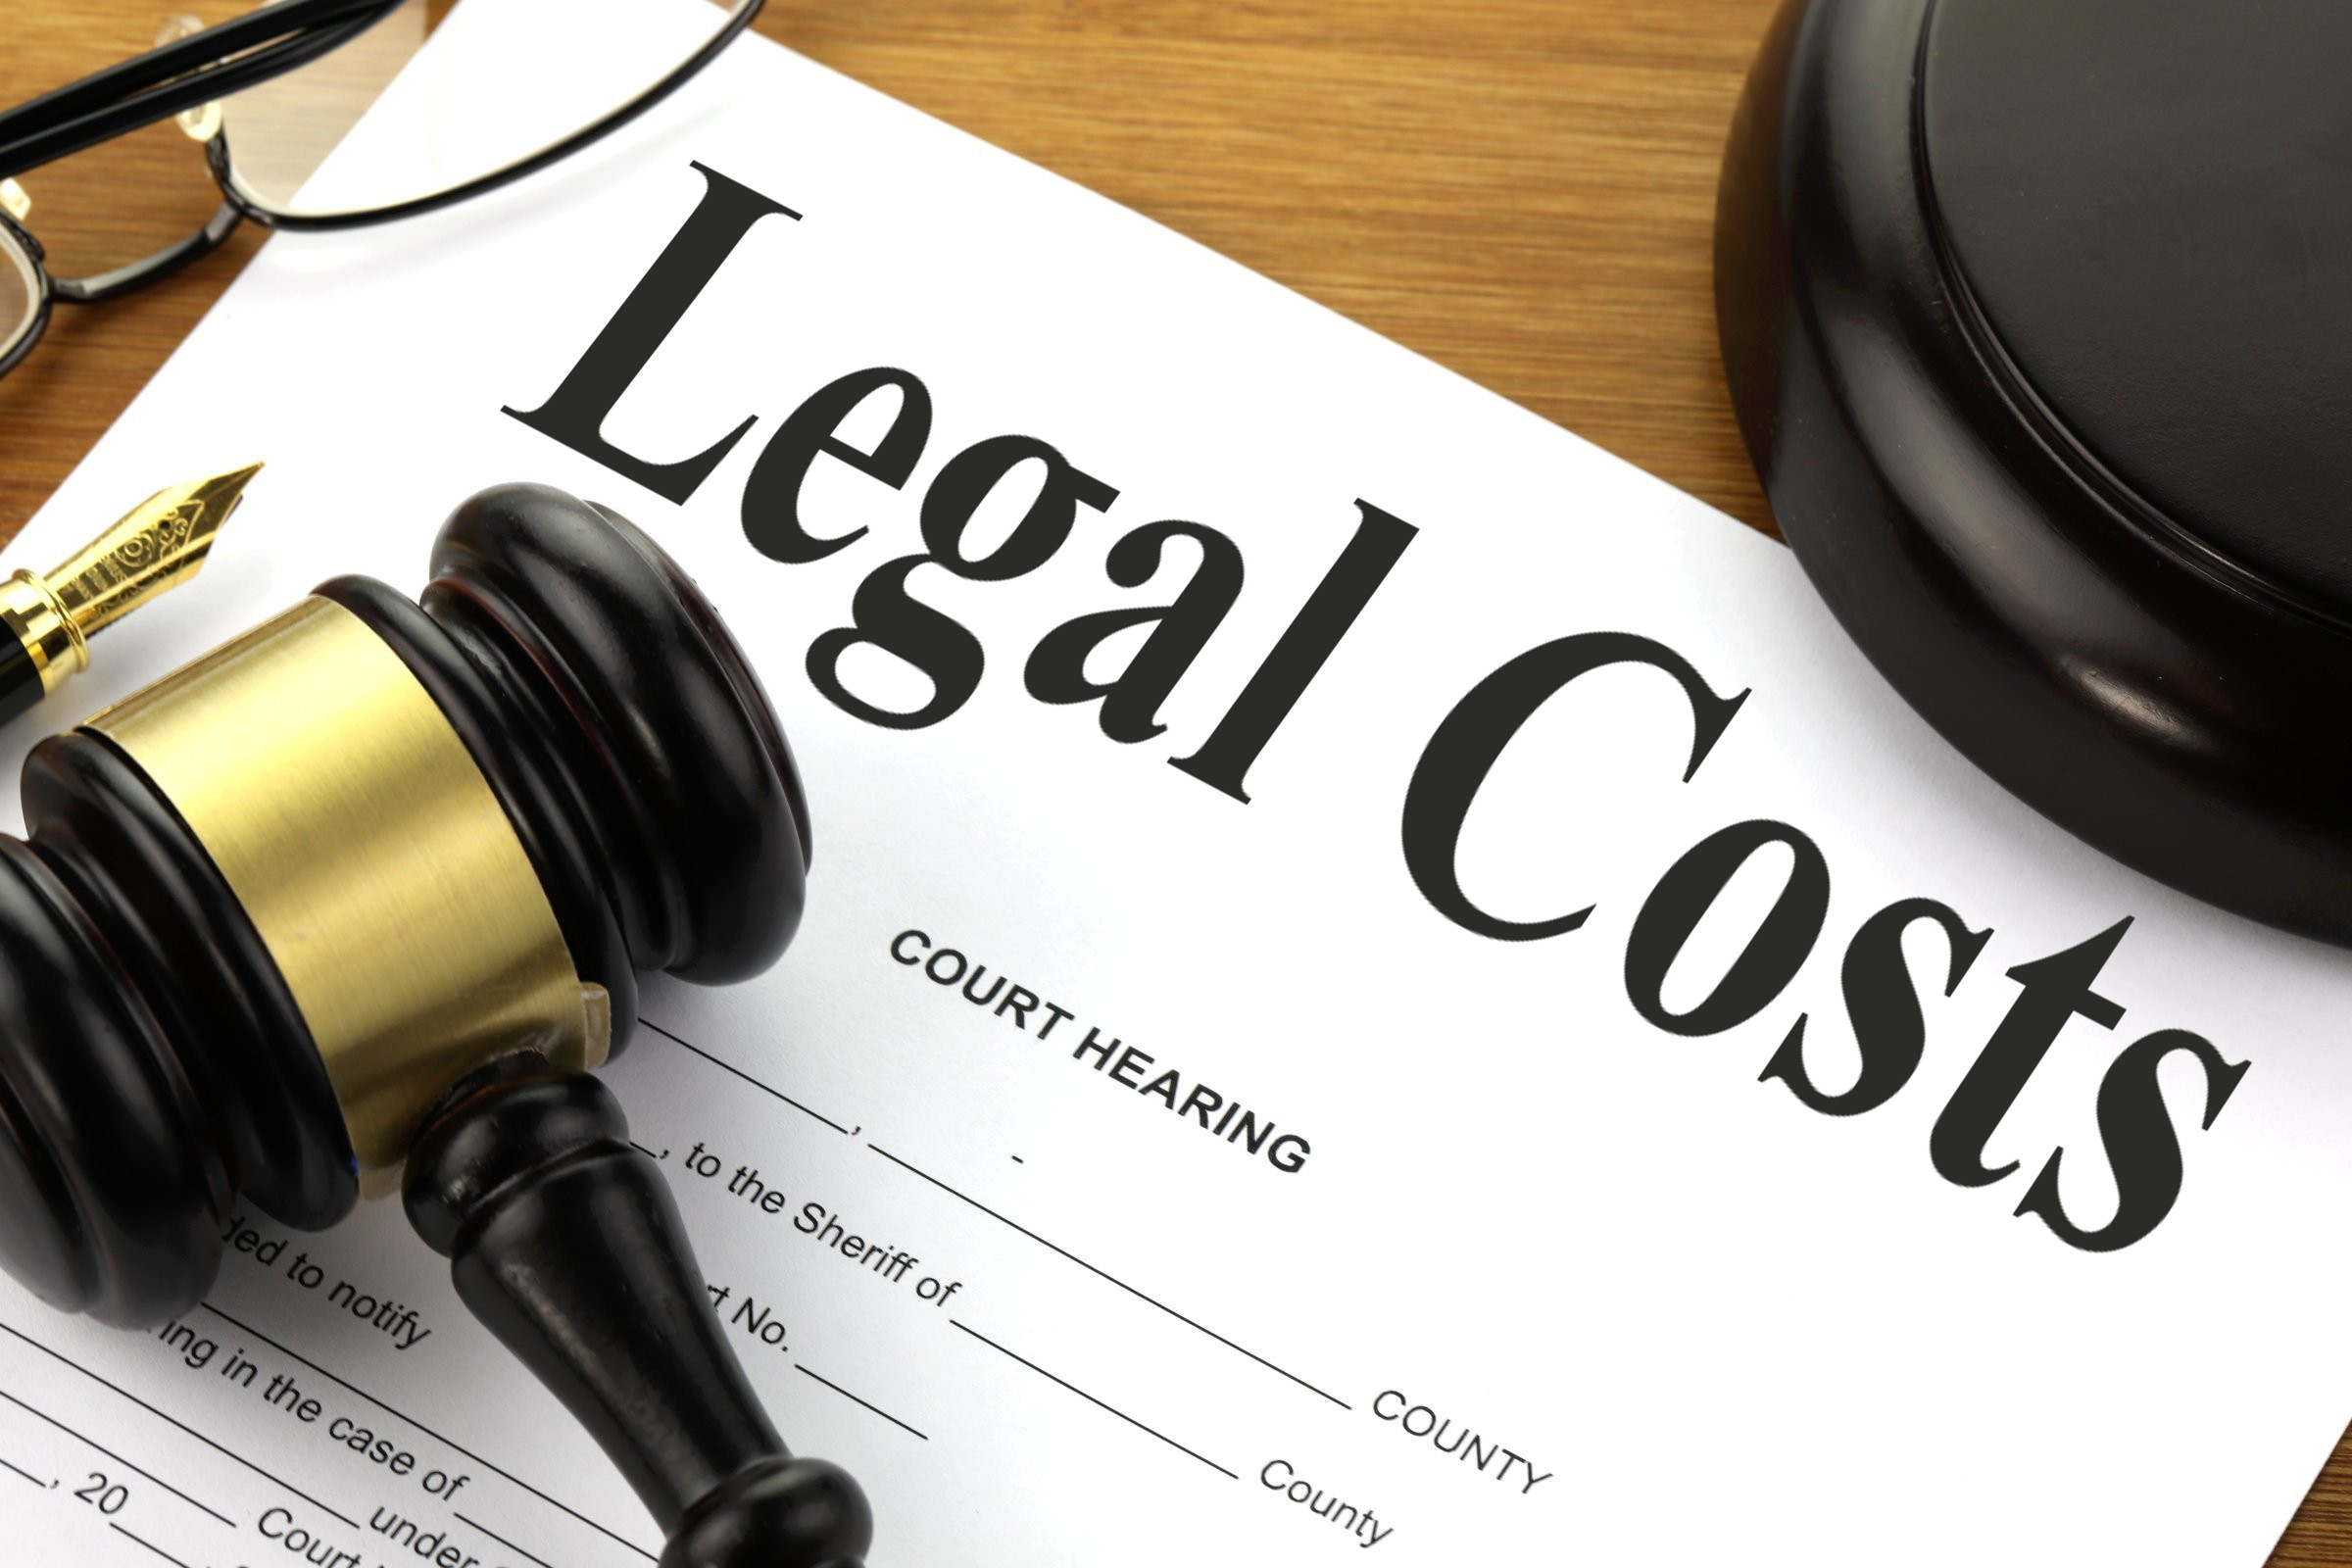 Free of Charge Creative Commons legal costs Image - Legal 1